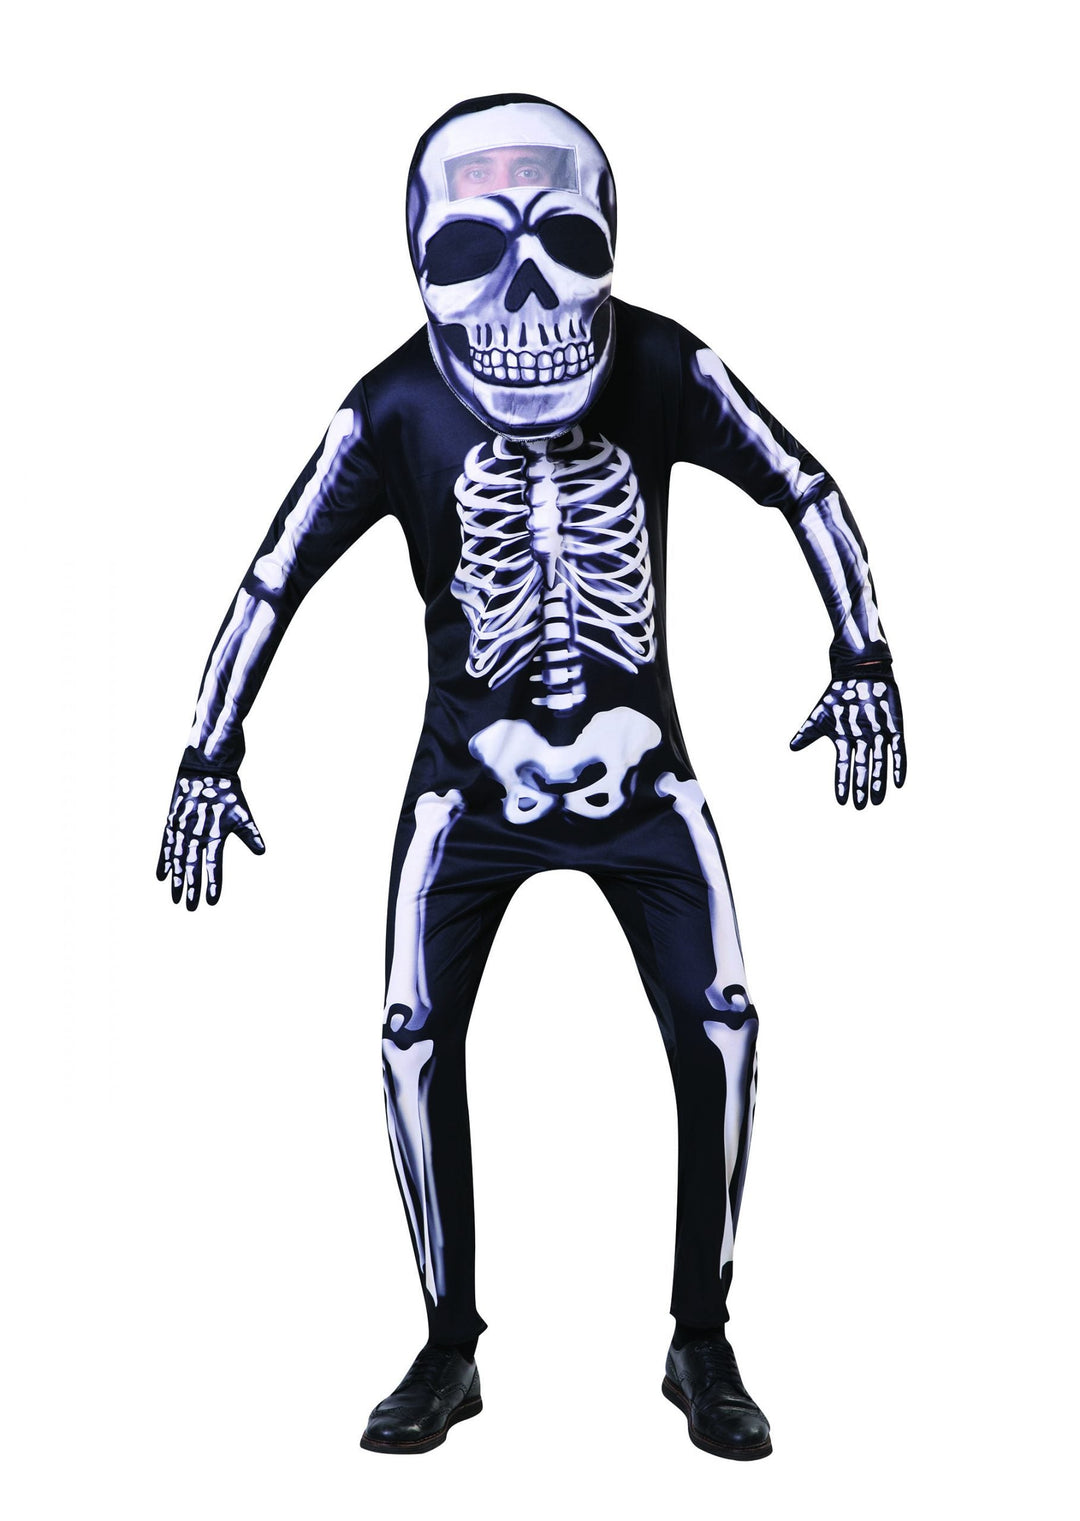 Big Head Skeleton Costume for Adults_1